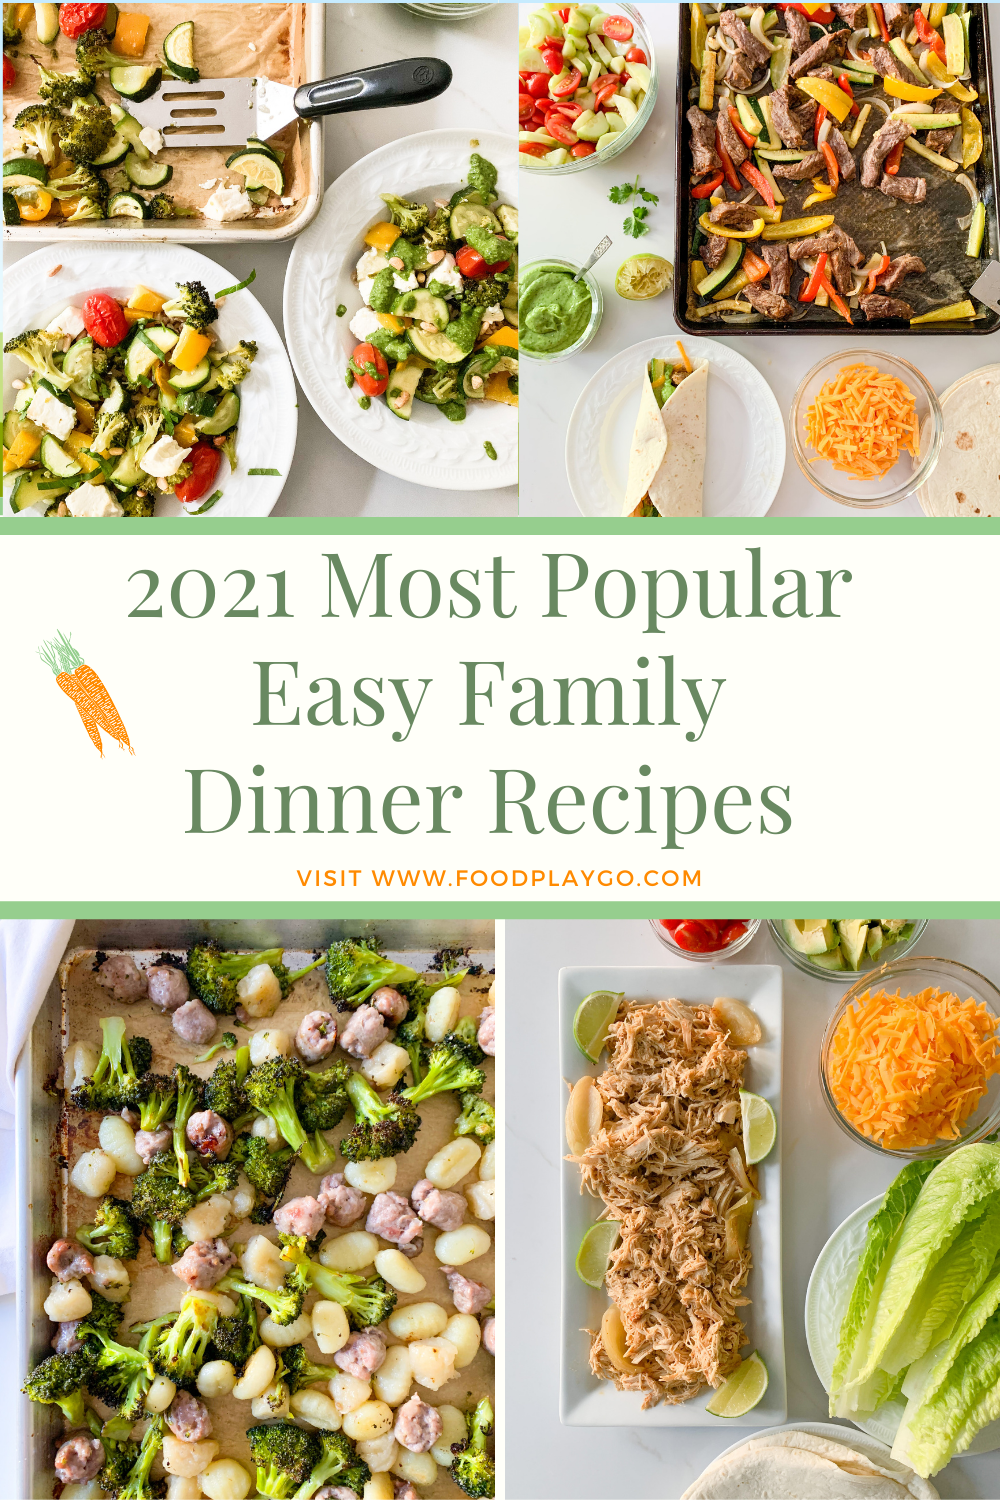 Top 10 Most Popular Dinner Recipes in 2021